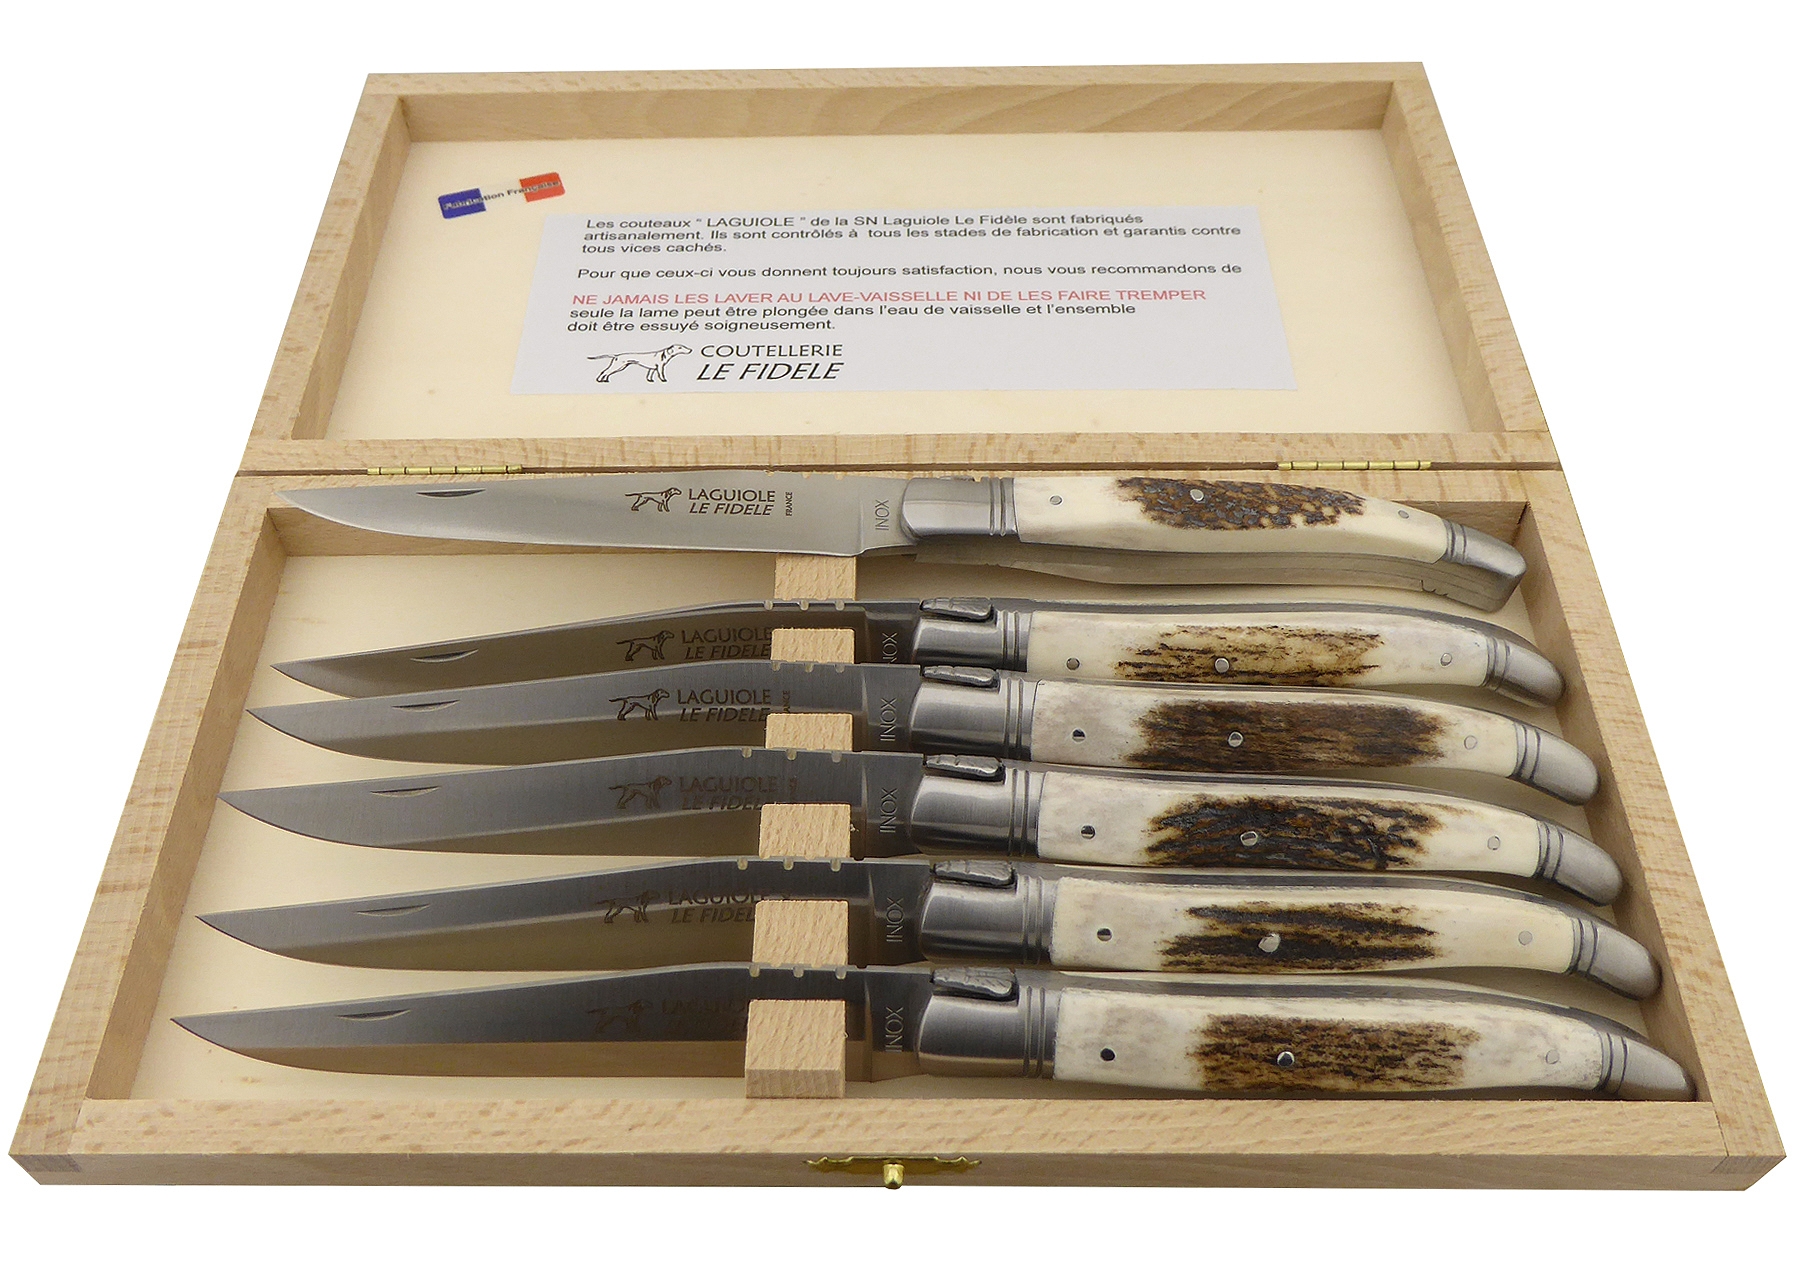 https://laguiole-17592.kxcdn.com/19548/laguiole-cutlery-of-6-knives-with-deer-antlers-handle-and-stainless-steel-bolsters.jpg